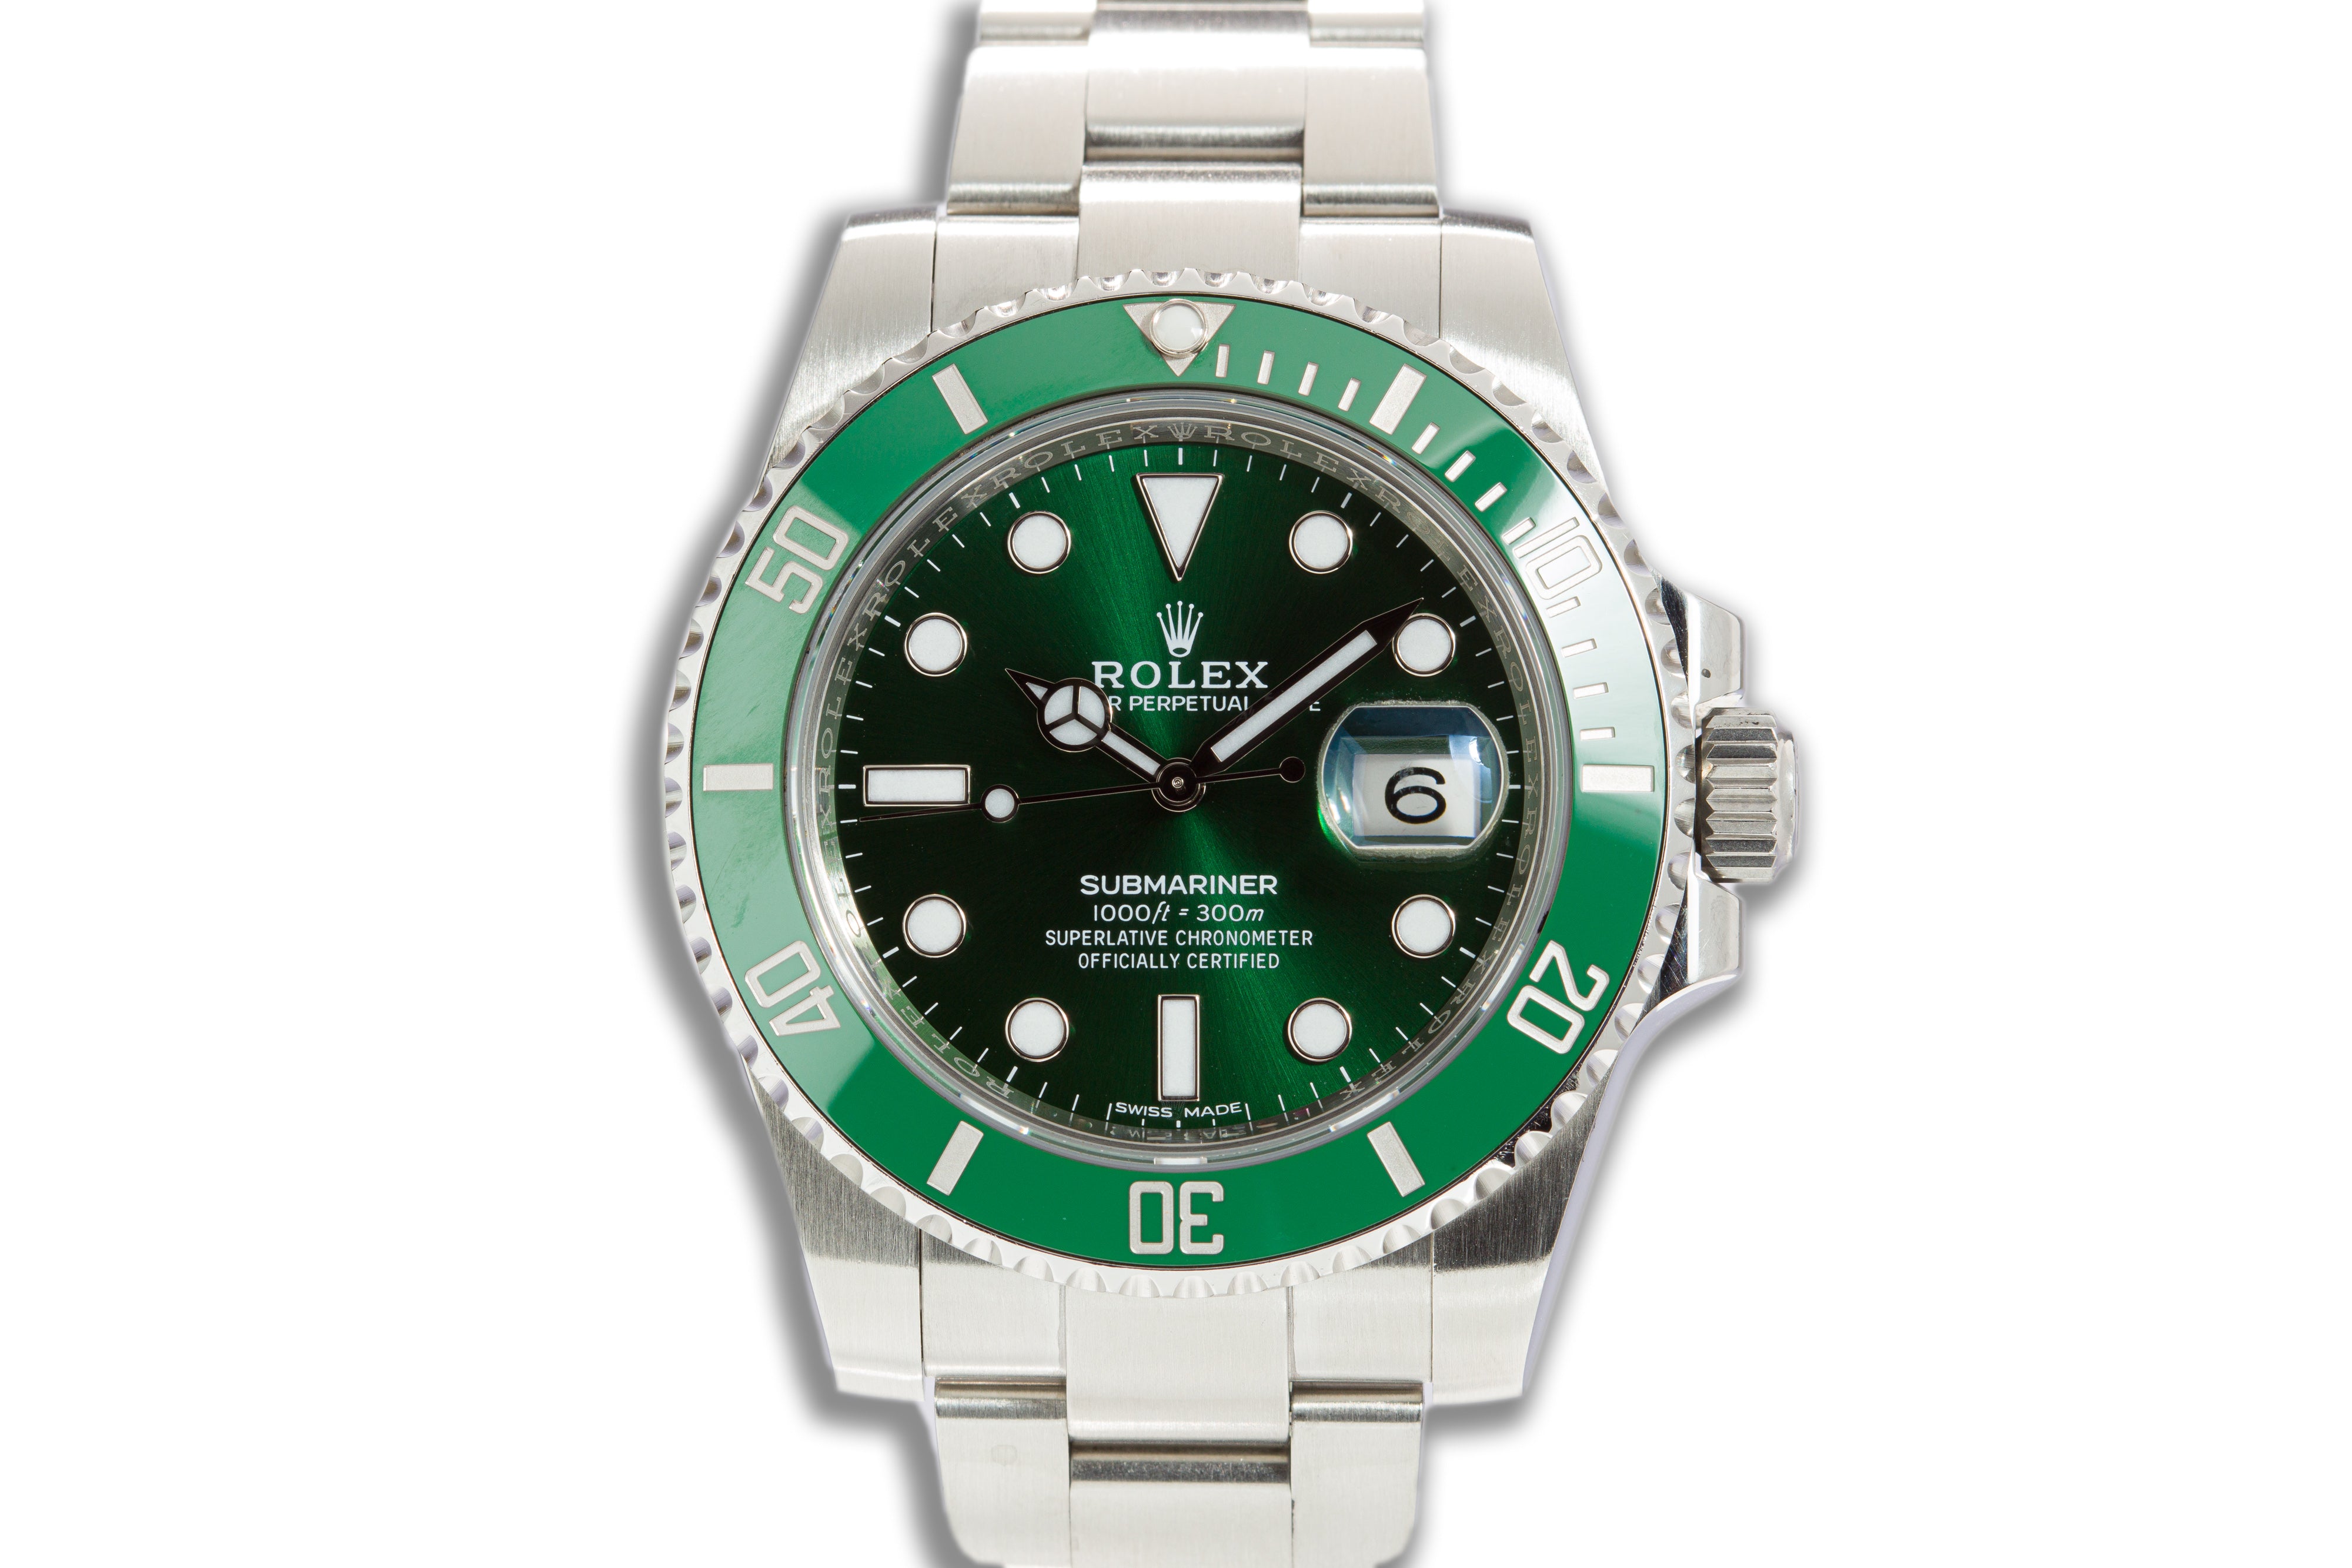 HQ Milton - 2016 Rolex Green Submariner 116610LV "Hulk" with Box, Booklets & Card, Inventory For Sale